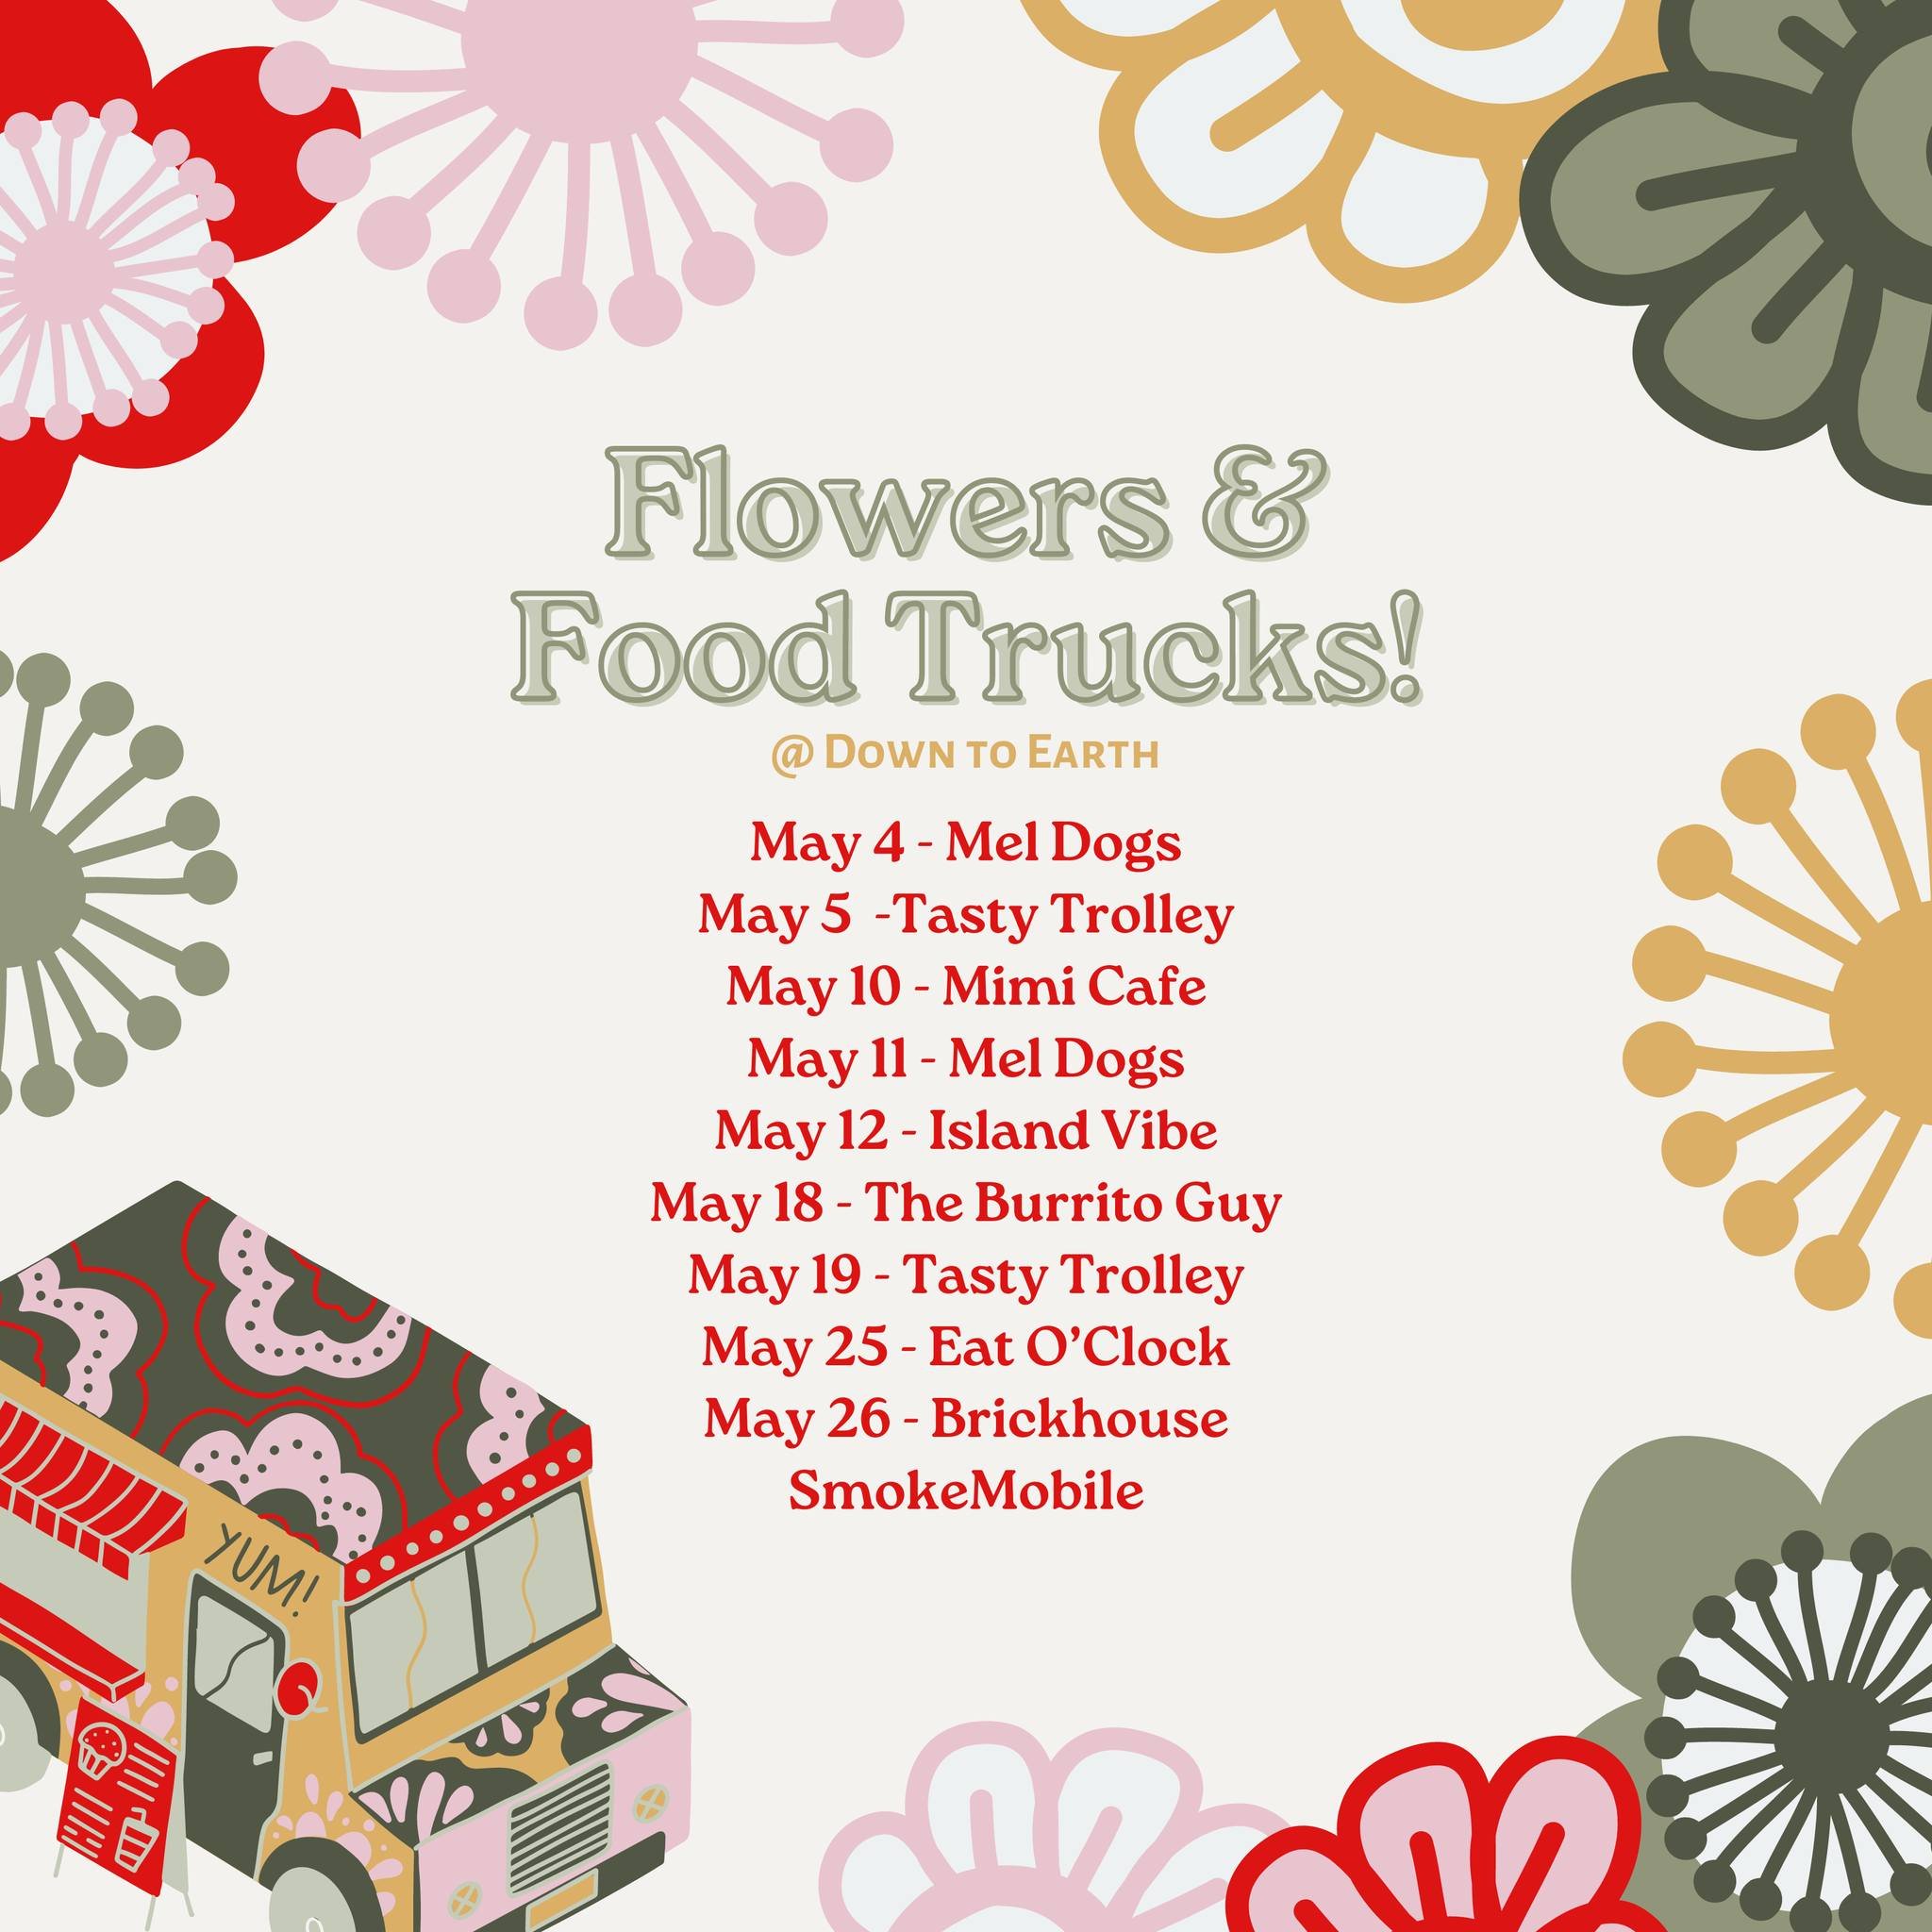 Full Flowers + Food Trucks Schedule for May!!

What a great way to kick off Summer! ☀

#eauclaire #downtoearth #flowersandfoodtrucks #foodtruckseauclaire